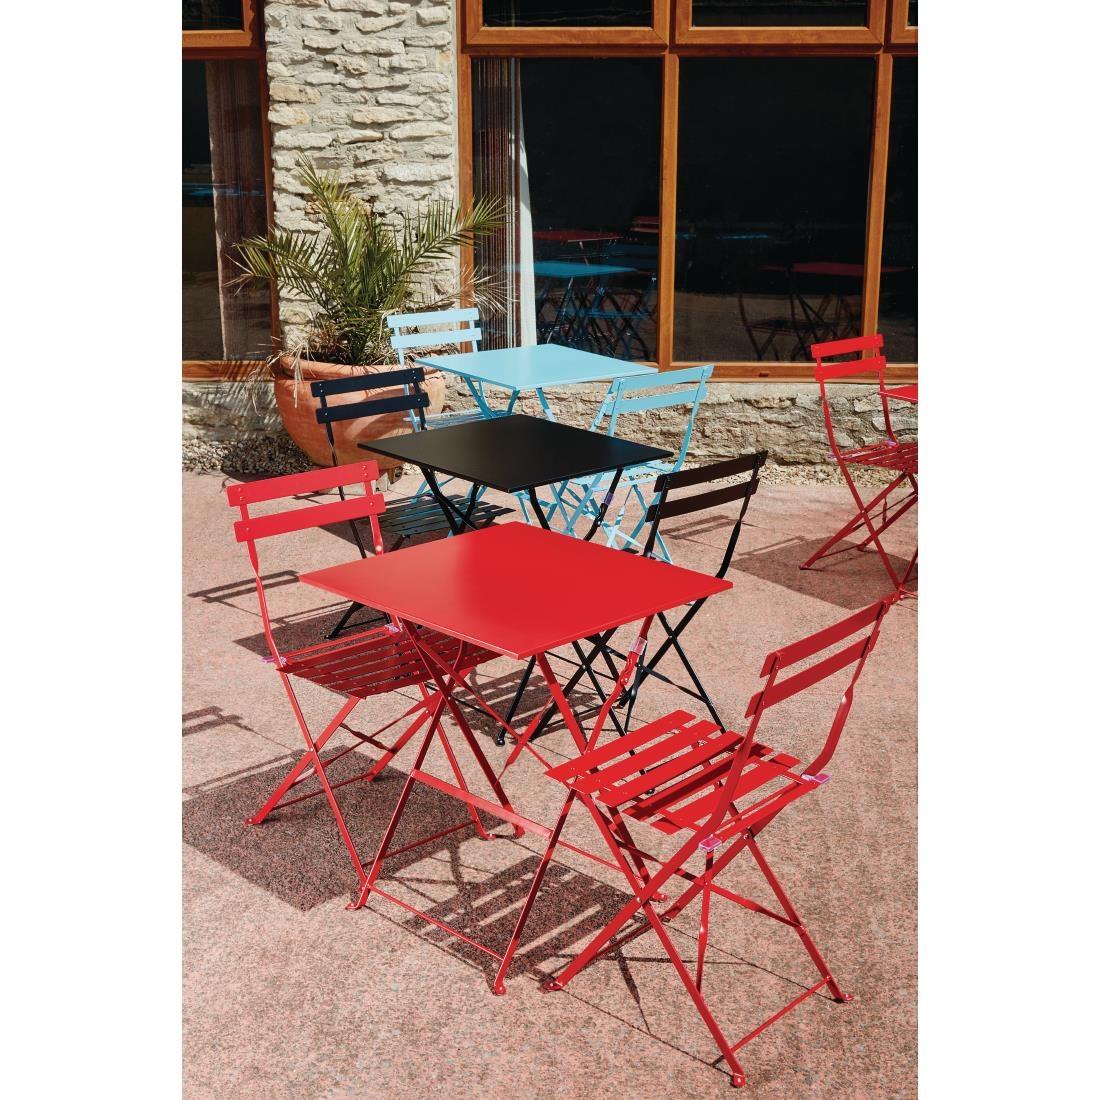 Bolero Red Pavement Style Steel Chairs (Pack of 2) - GH555  - 5